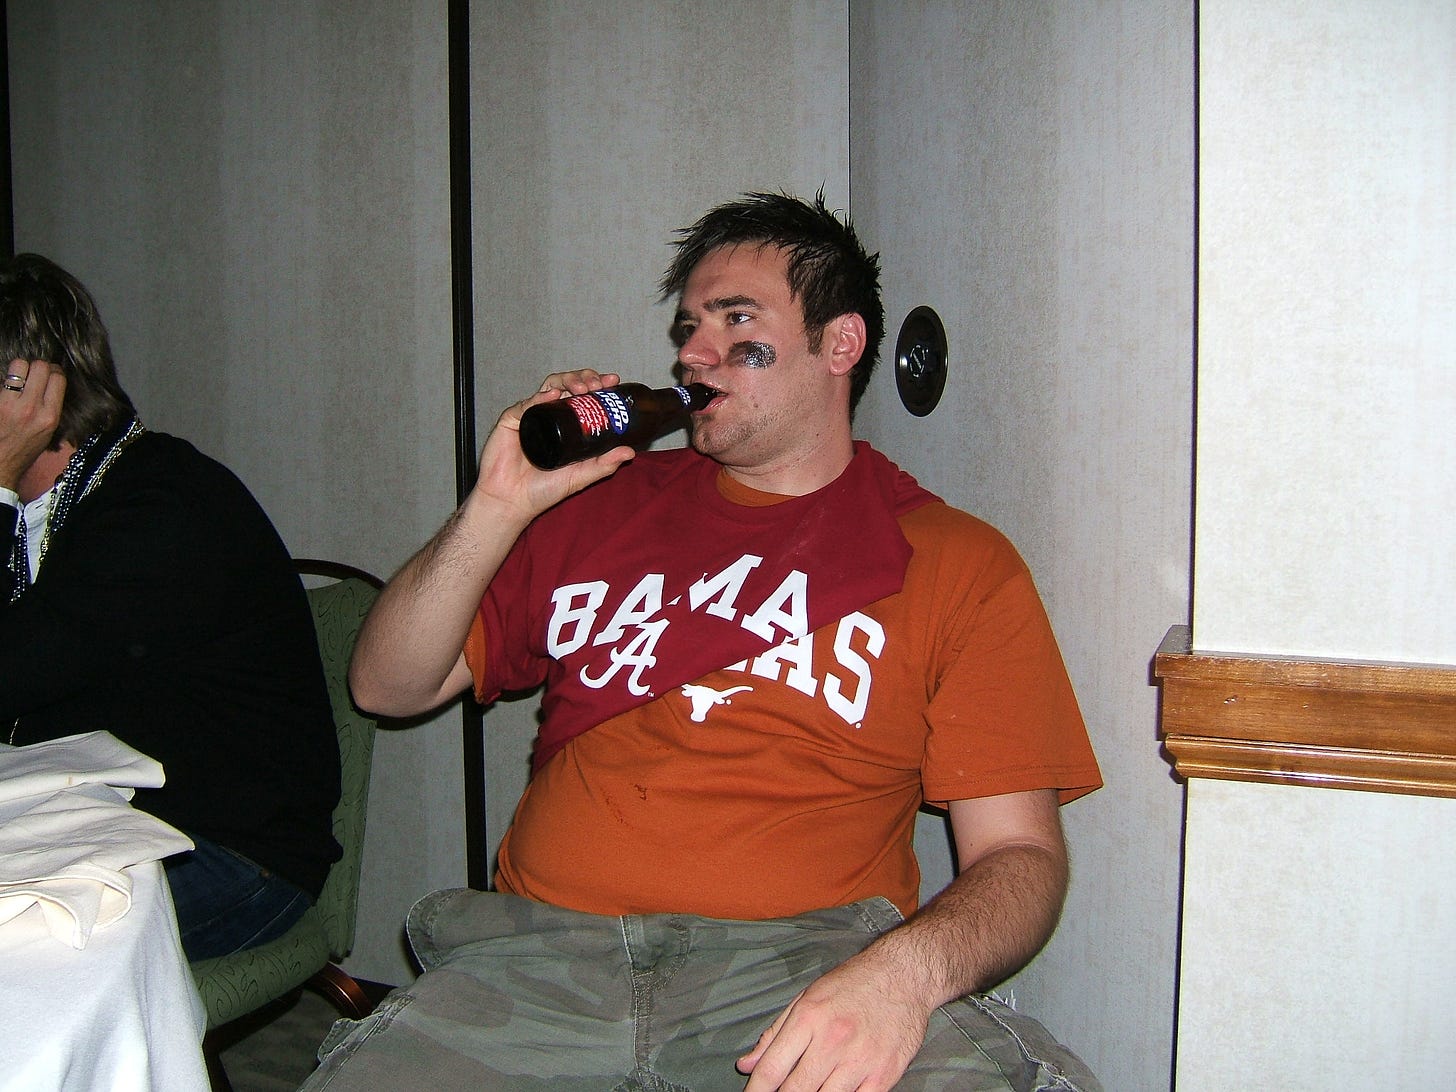 A photo of me playing a “confused college football fan” at a work costume party back in 2008.